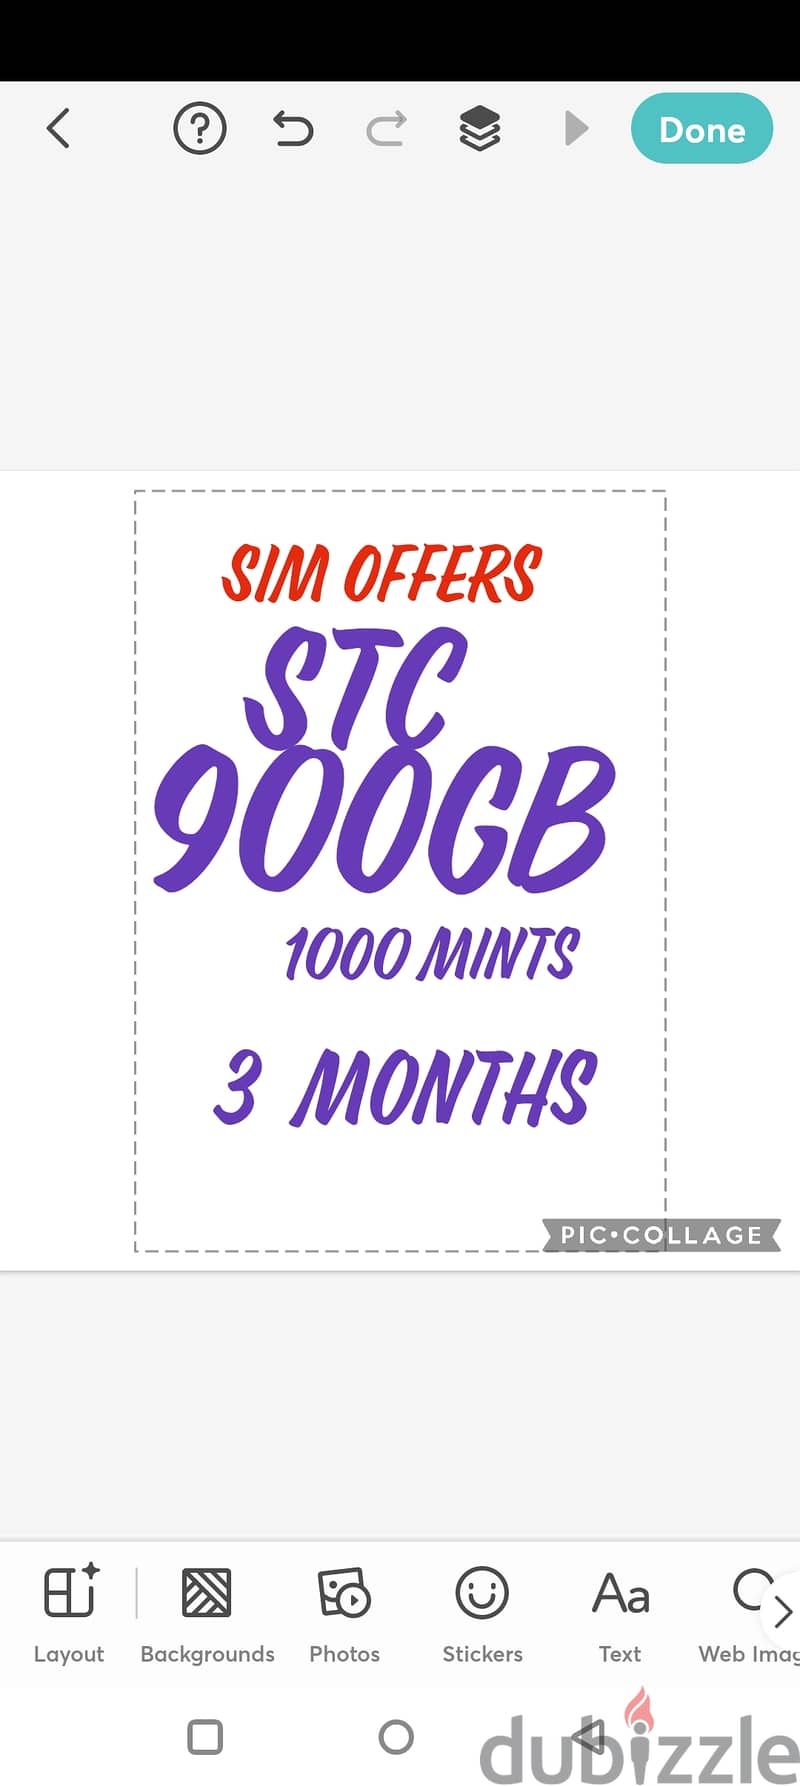 Sim cards offers 3 months 900gb 1000 mints oreedo and stc 2